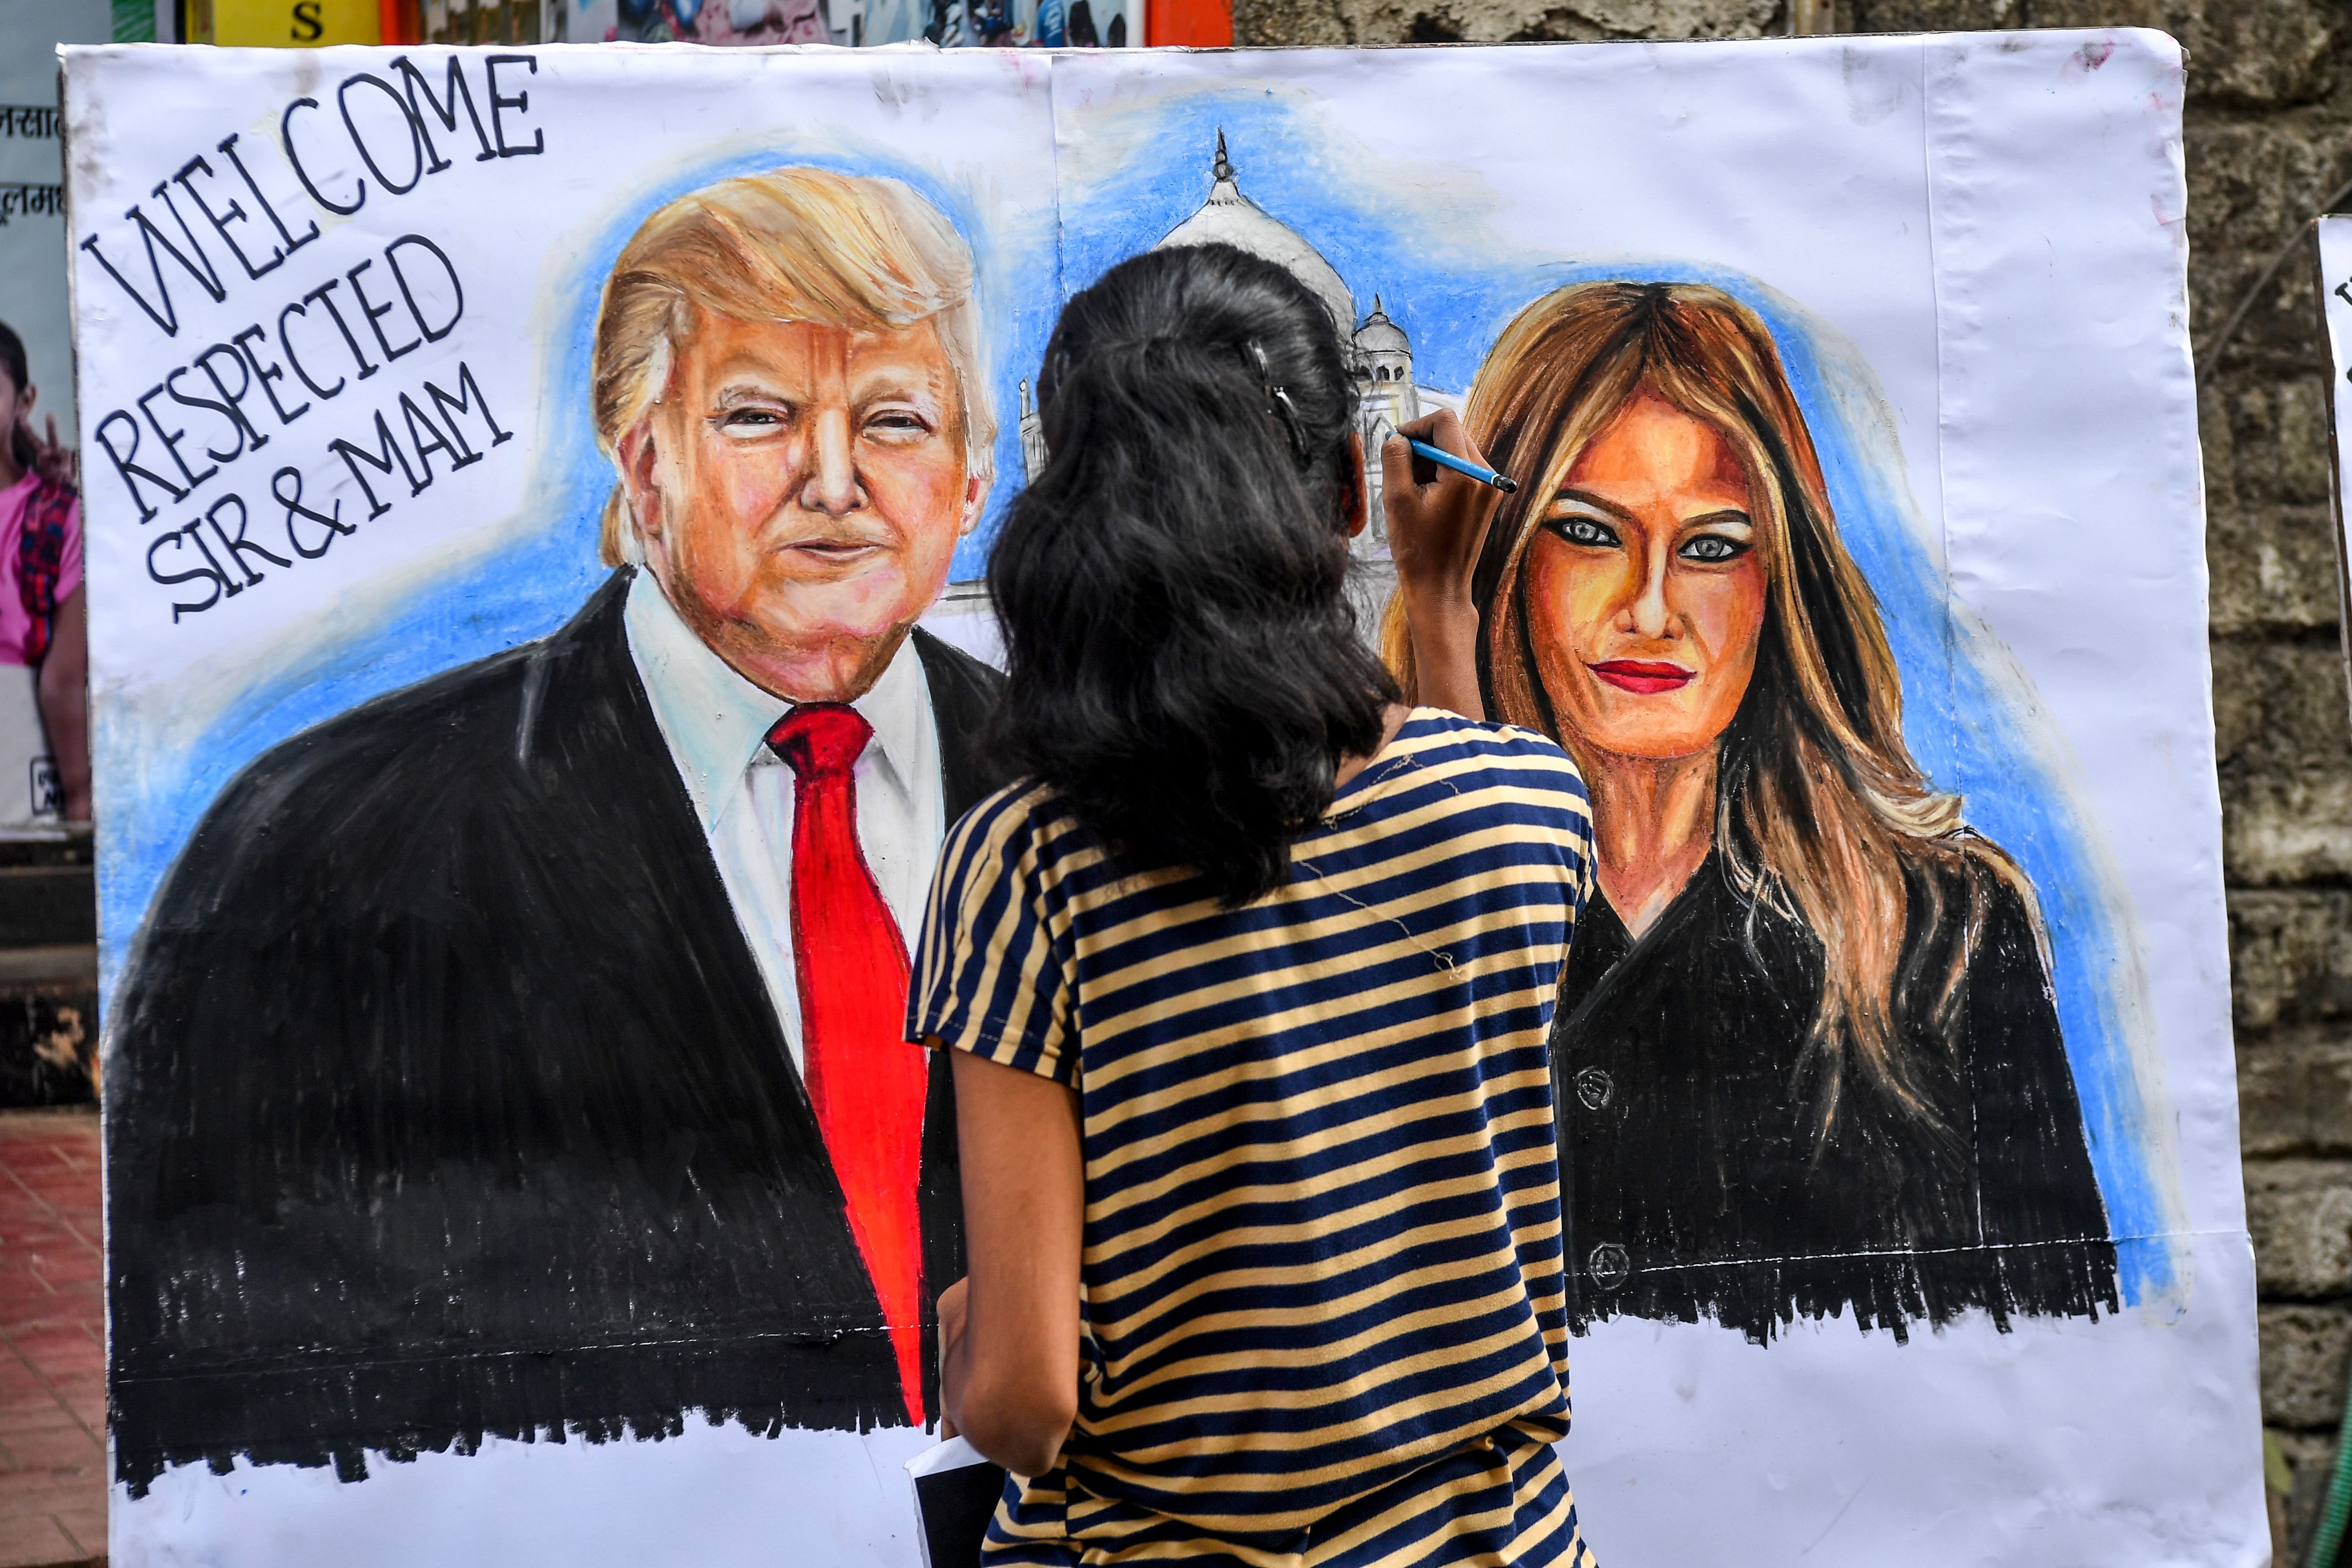 A student paints on a canva faces of US President Donald Trump (L) and his wife Melania, in the street in Mumbai on February 21